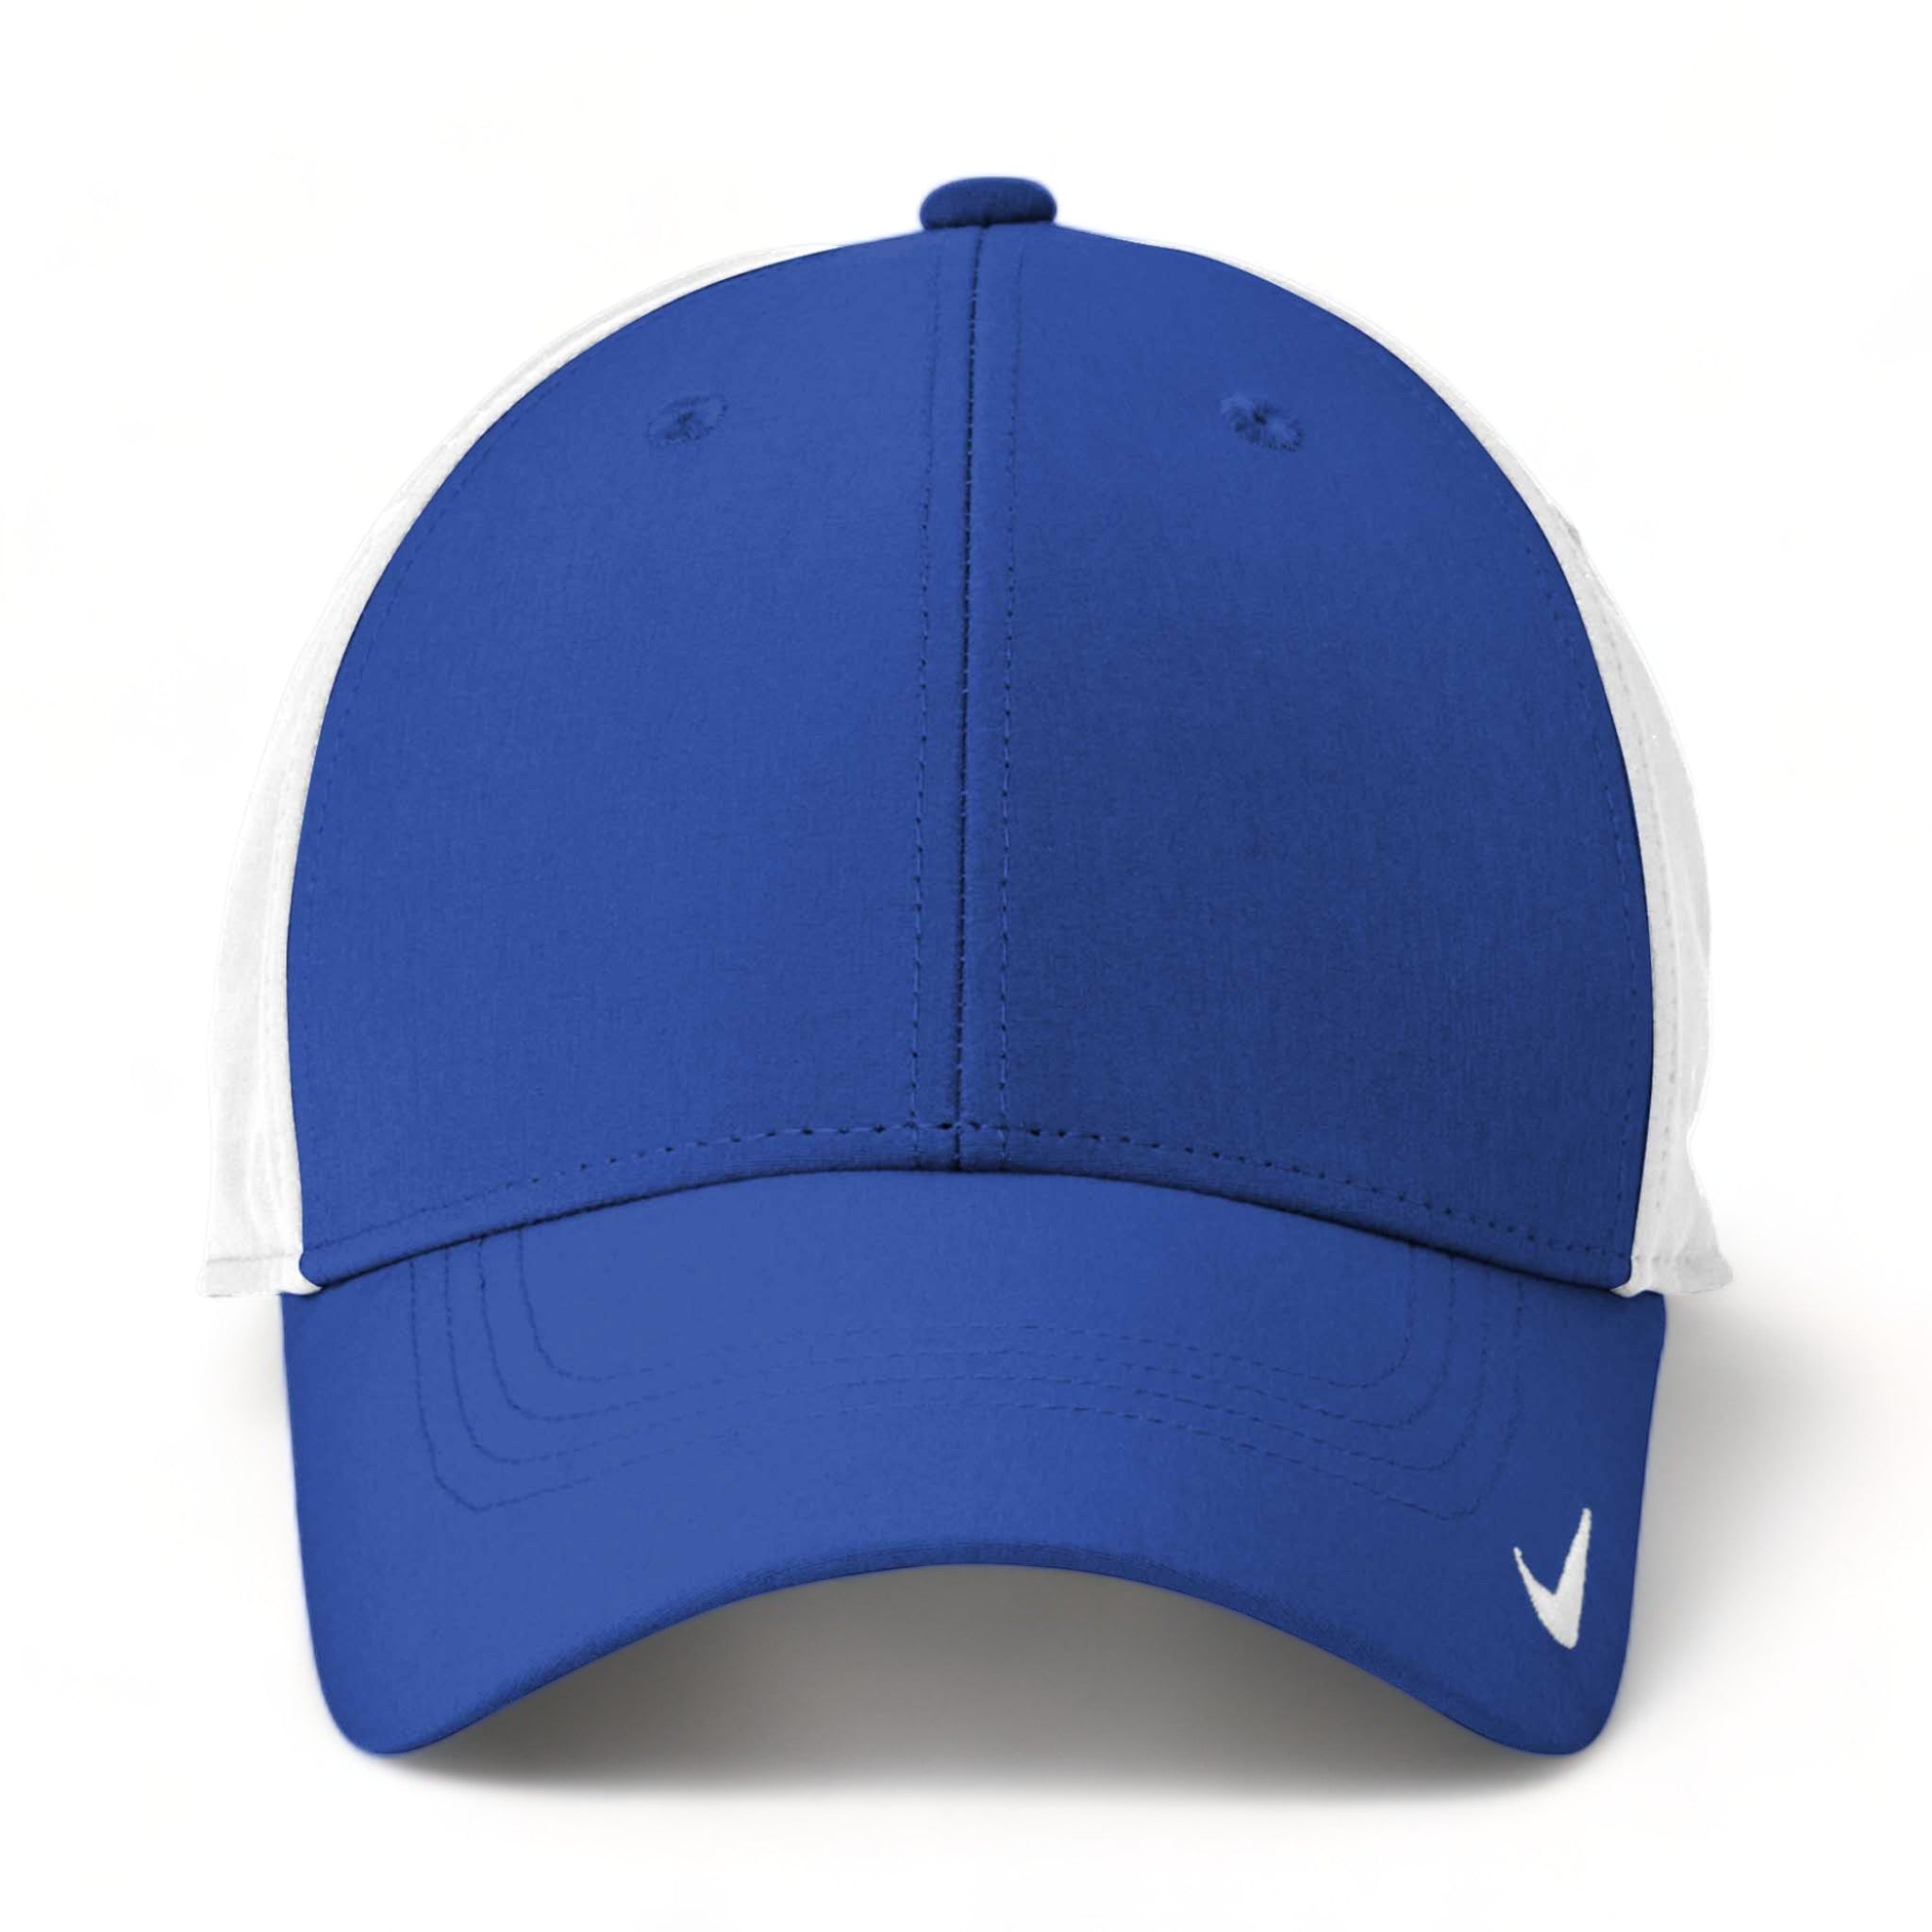 Front view of Nike NKFB6447 custom hat in game royal and white